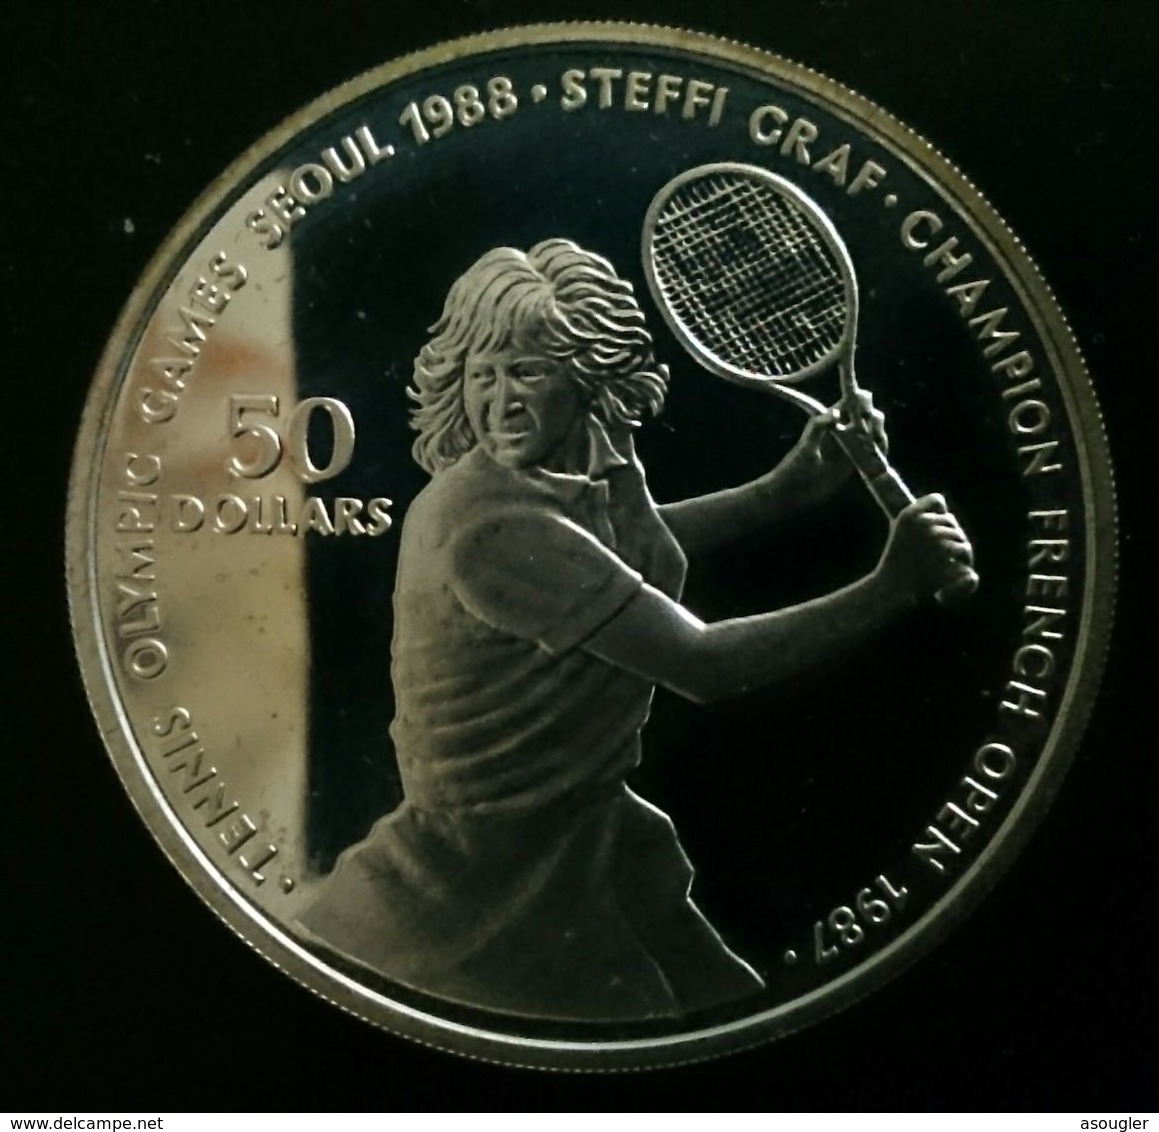 NIUE 50 DOLLARS 1987 SILVER PROOF "24th Olympiad Tennis Games, Seoul 1988" Free Shipping Via Registered Air Mail - Niue